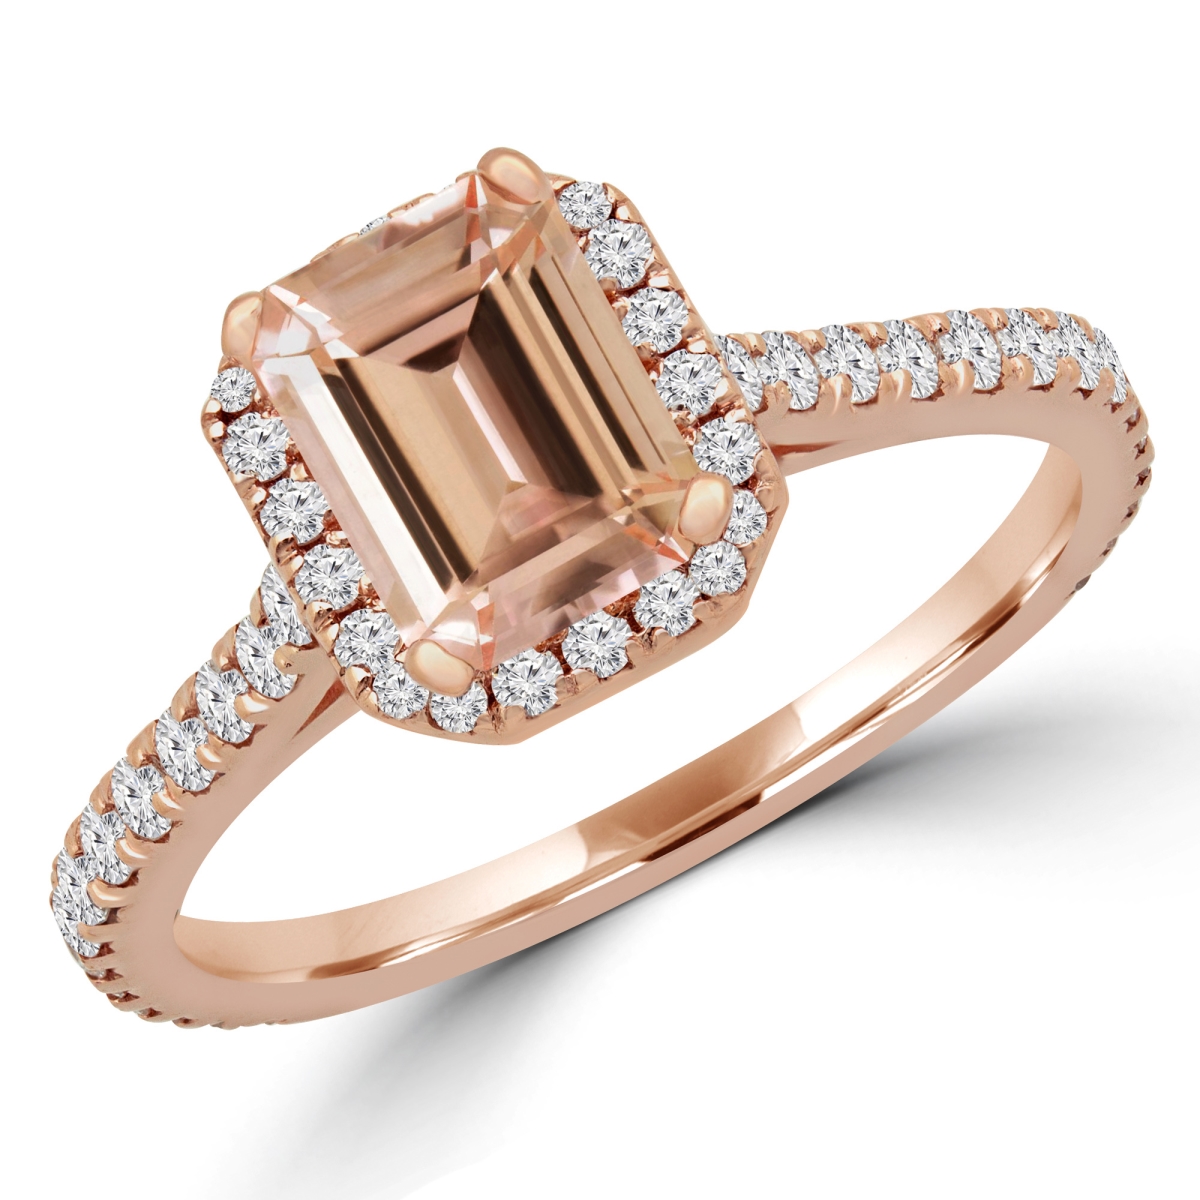 Picture of Majesty Diamonds MD180580-7.75 1.25 CTW Emerald Pink Morganite Halo Engagement Ring in 14K Rose Gold - Size 7.75